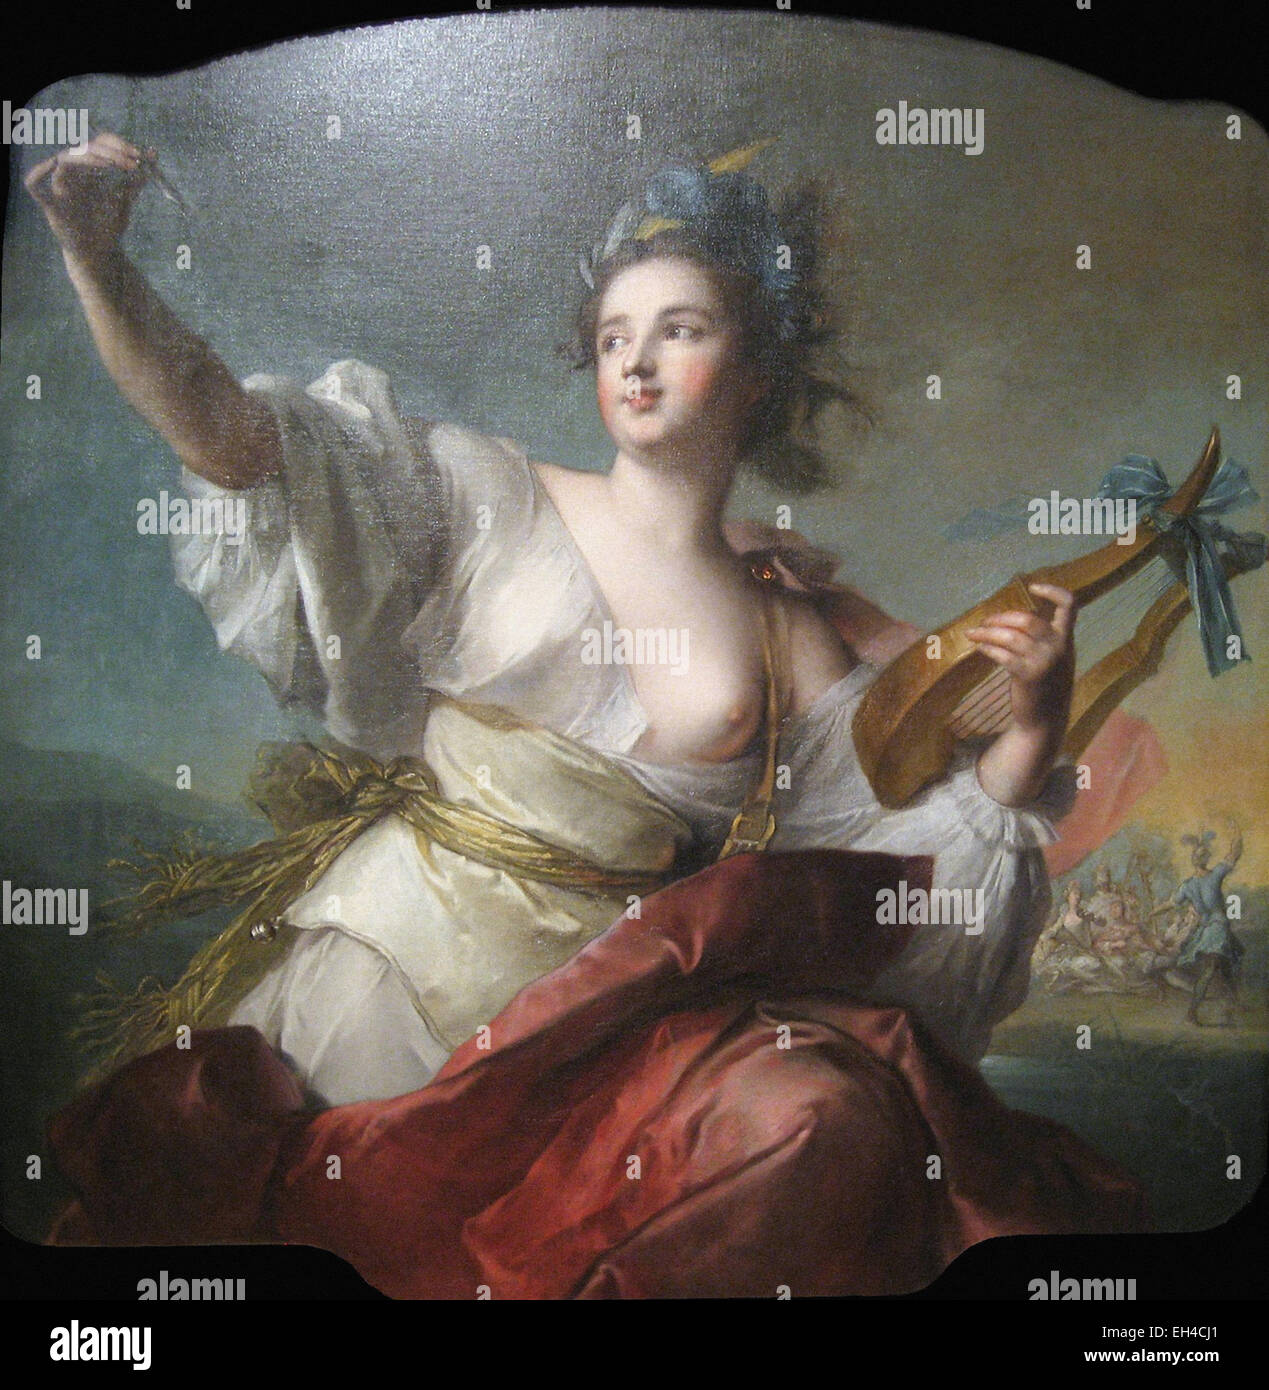 Jean-Marc Nattier  Terpsichore, Muse of Music and Dance Stock Photo